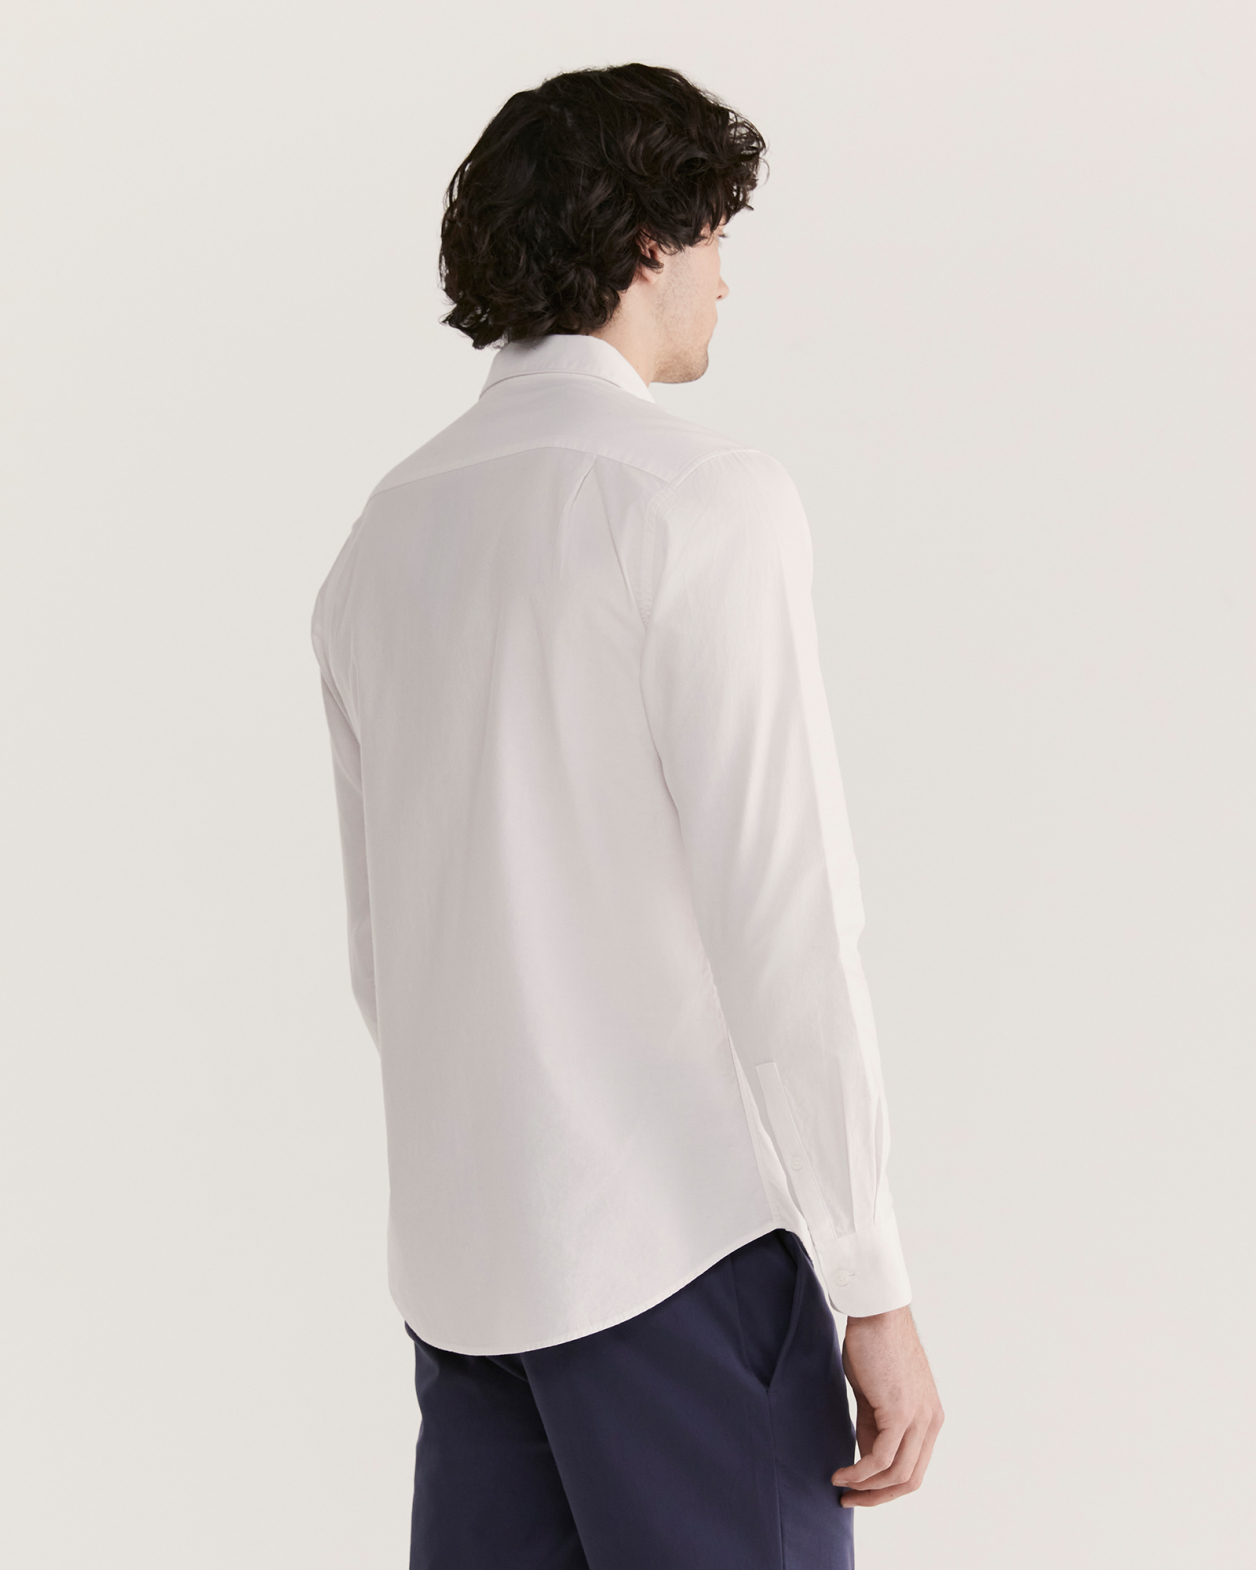 Christopher Oxford Long Sleeve Classic Shirt in WHITE